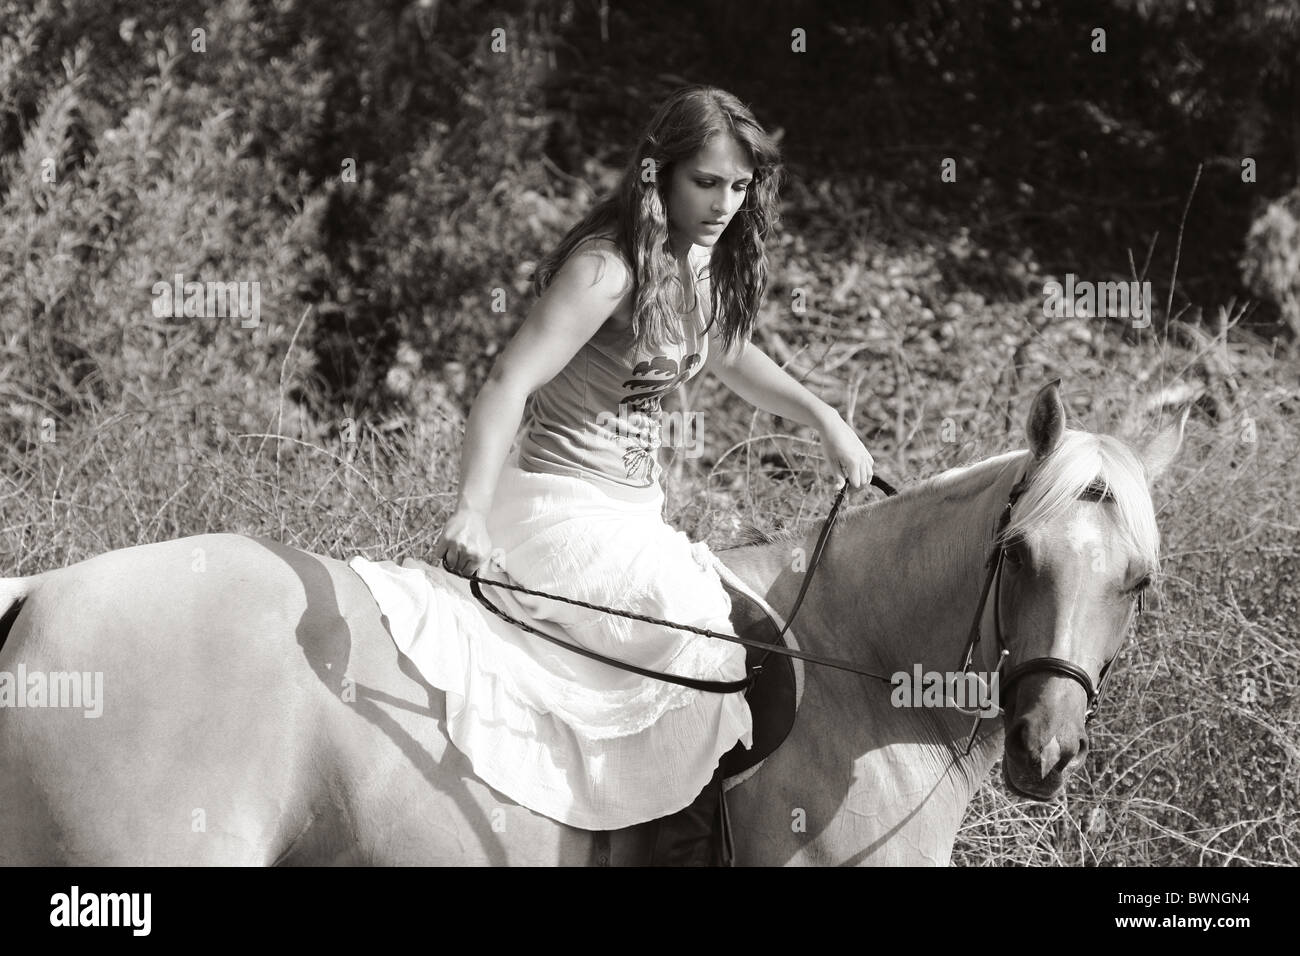 Attractive girl riding on horse in deserted rural location Stock Photo